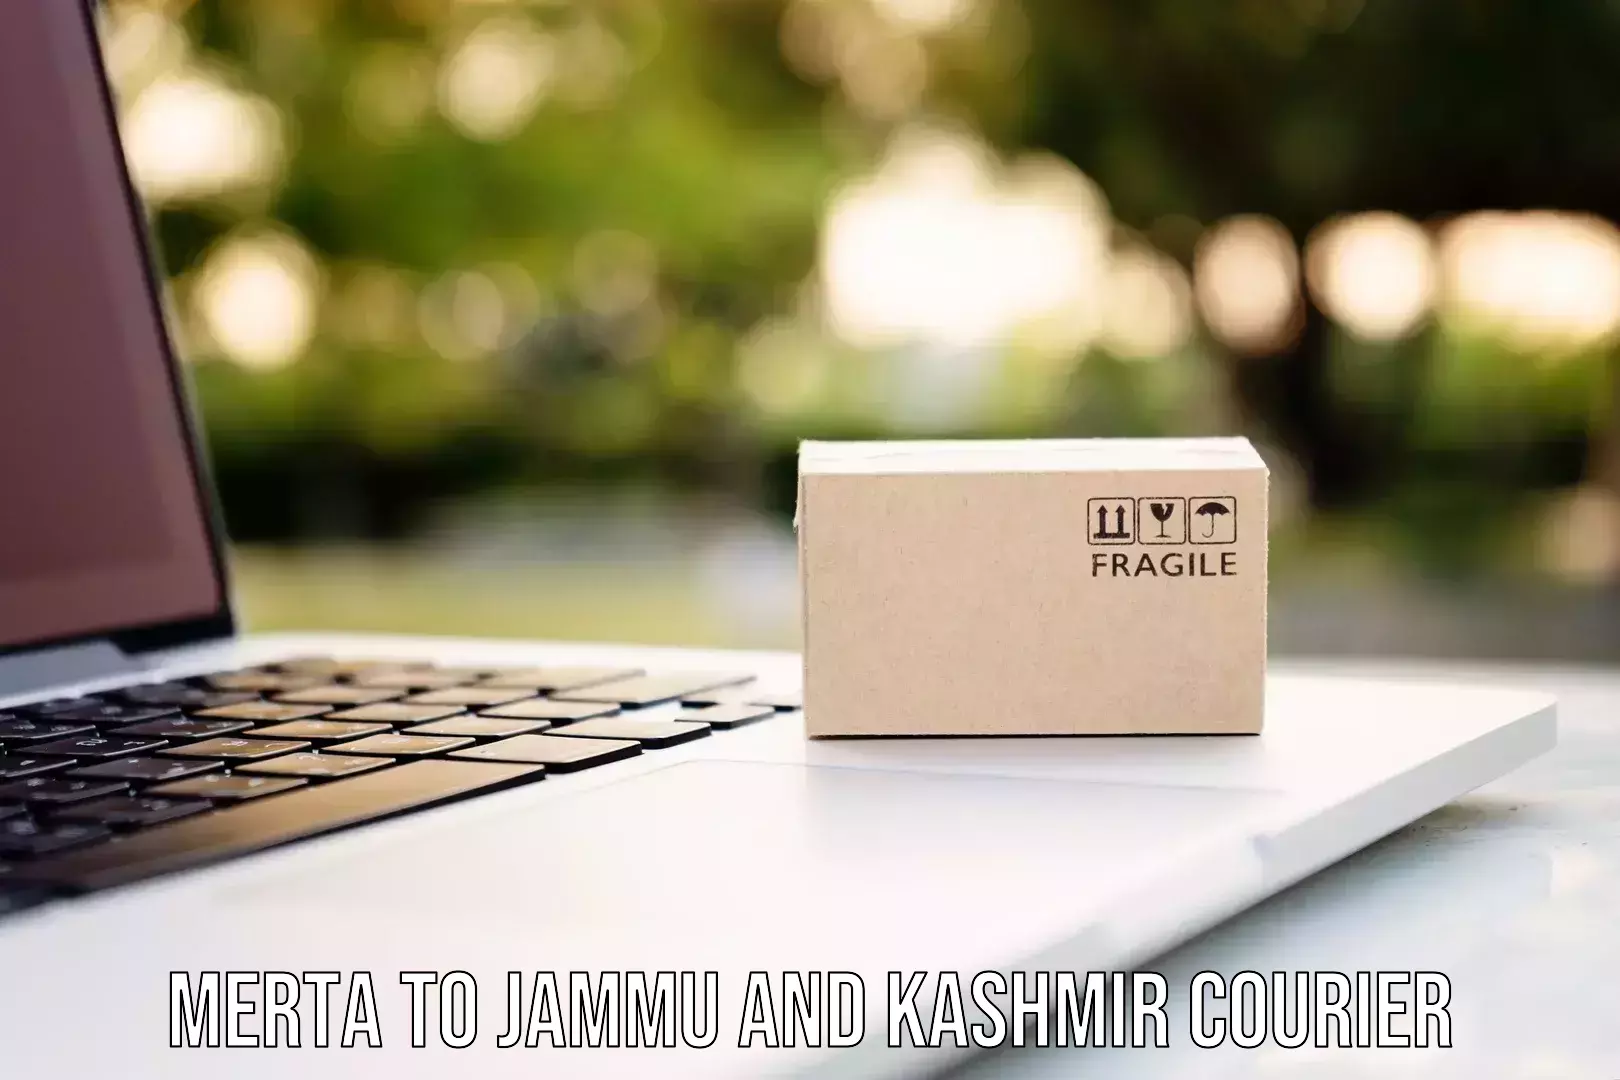 State-of-the-art courier technology Merta to Jammu